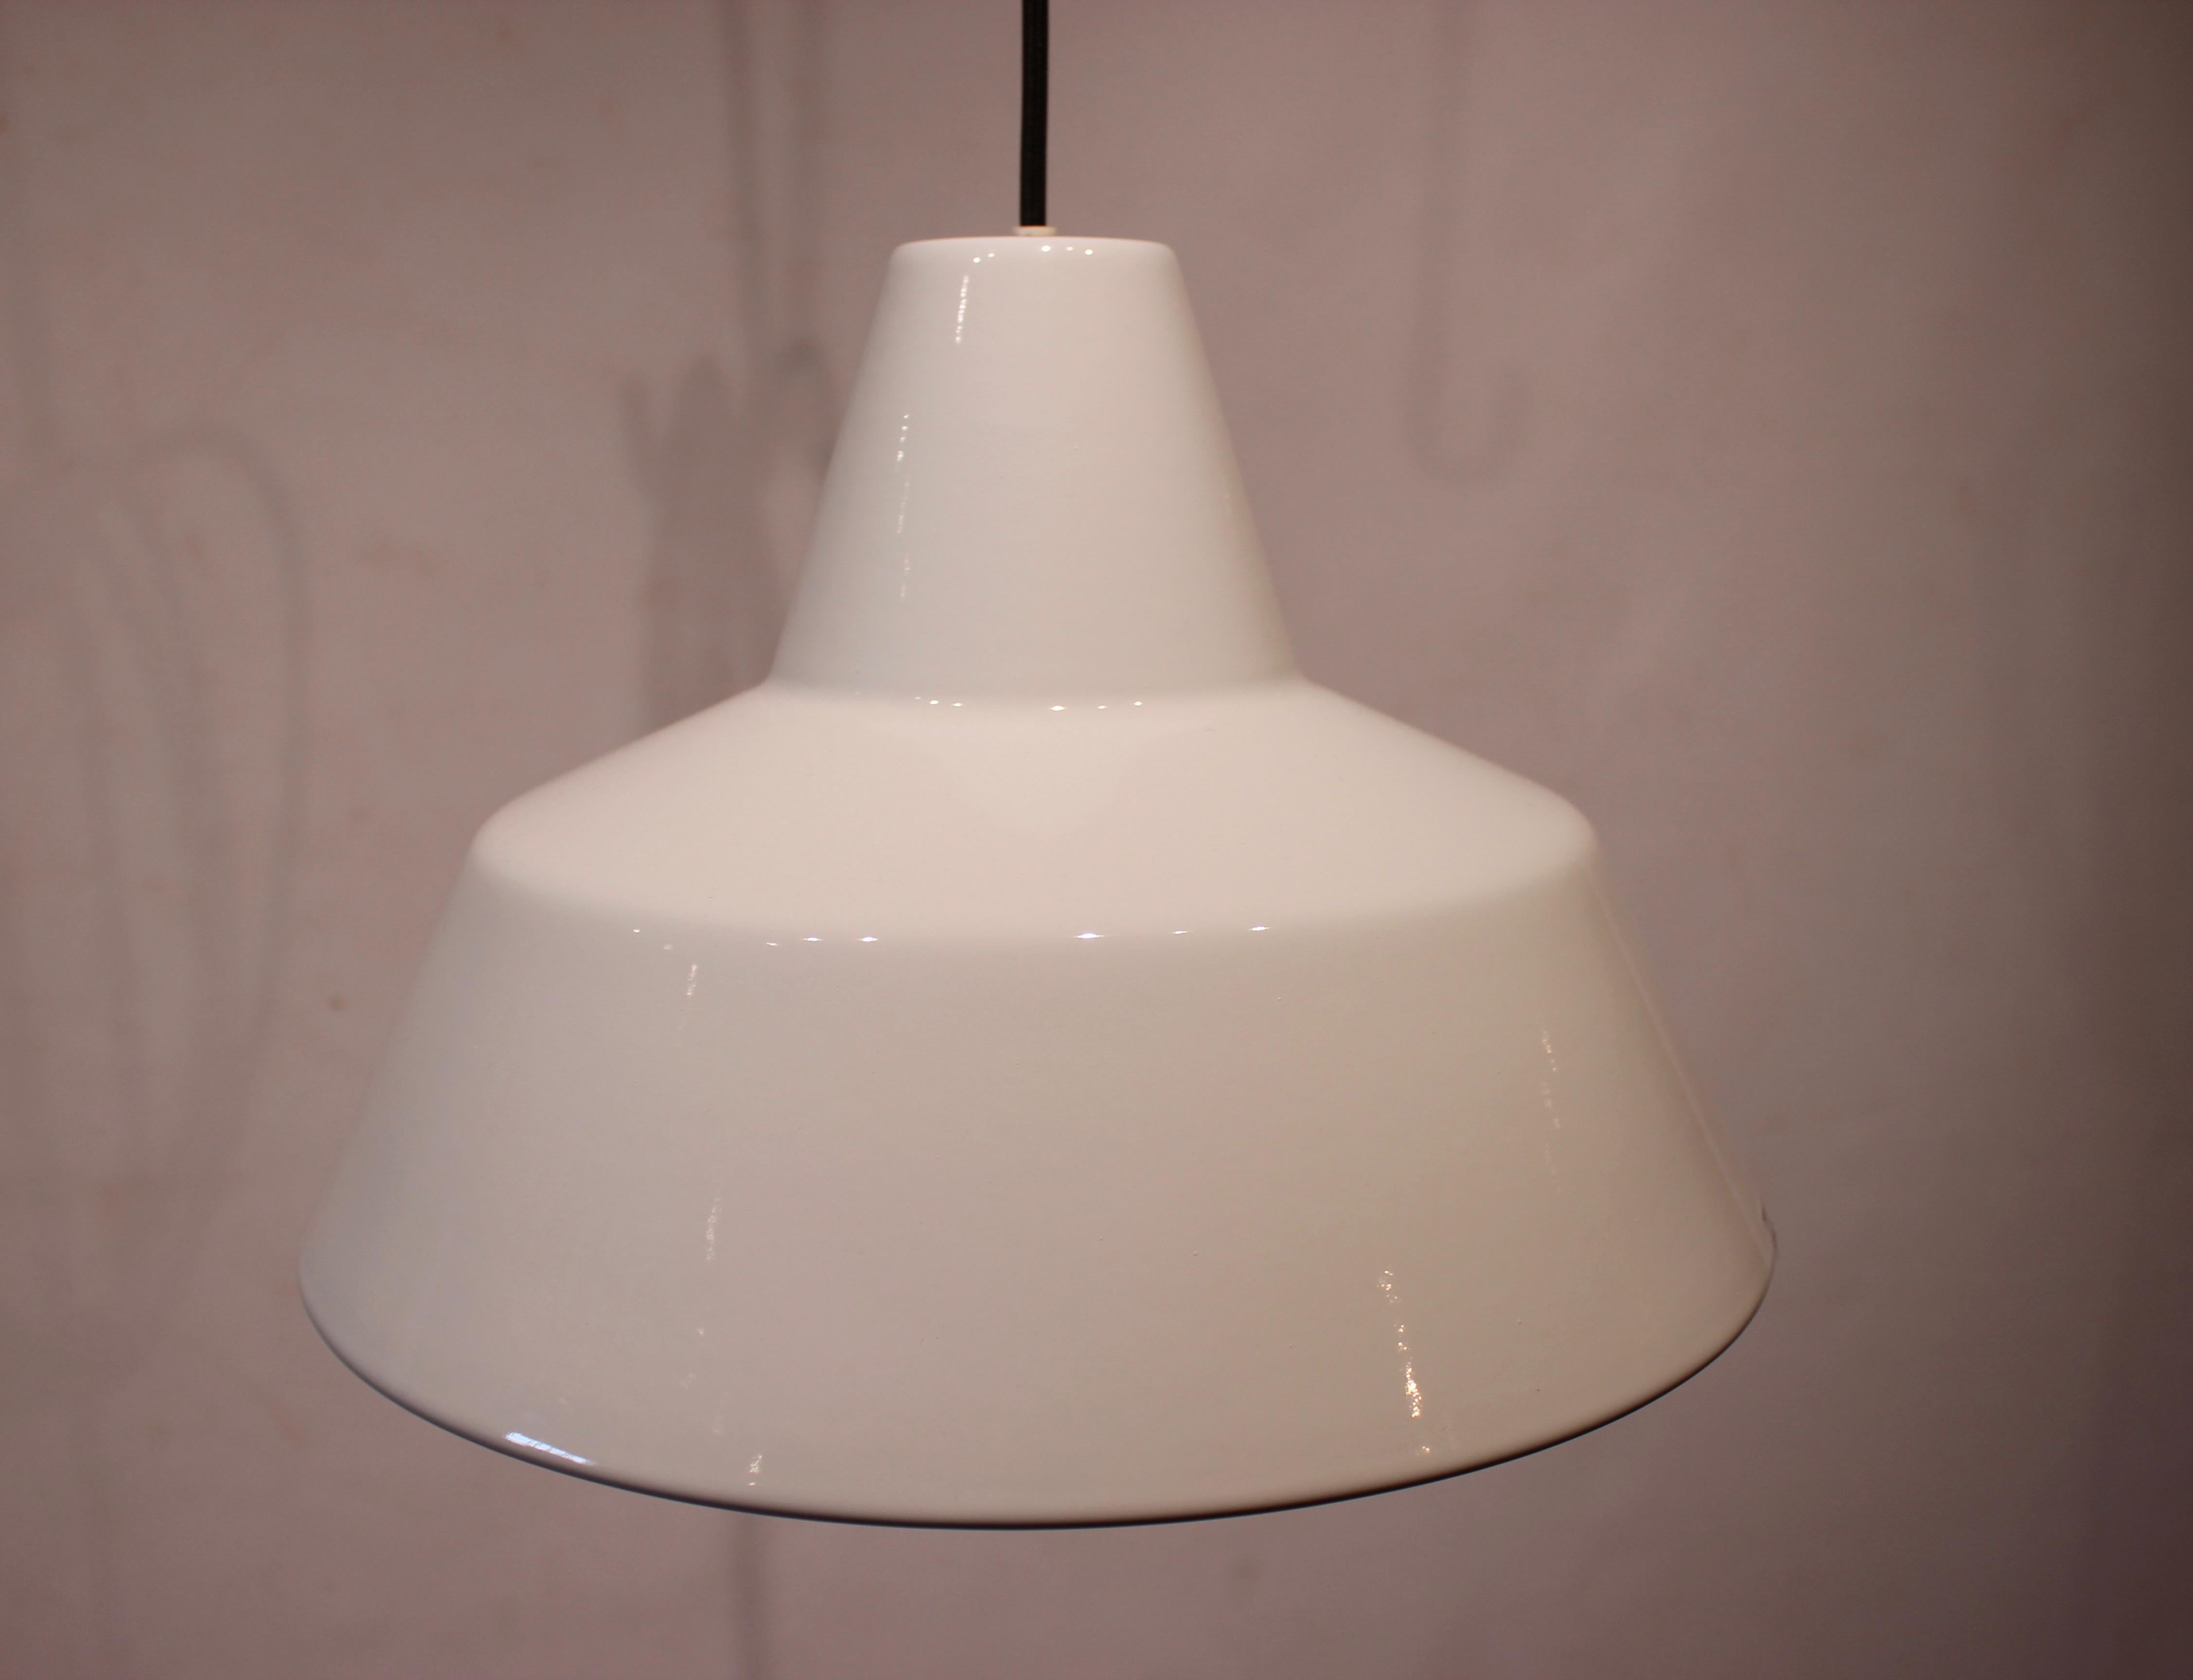 Scandinavian Modern Pair of White Workshop Lamps Designed by Louis Poulsen from the 1970s For Sale